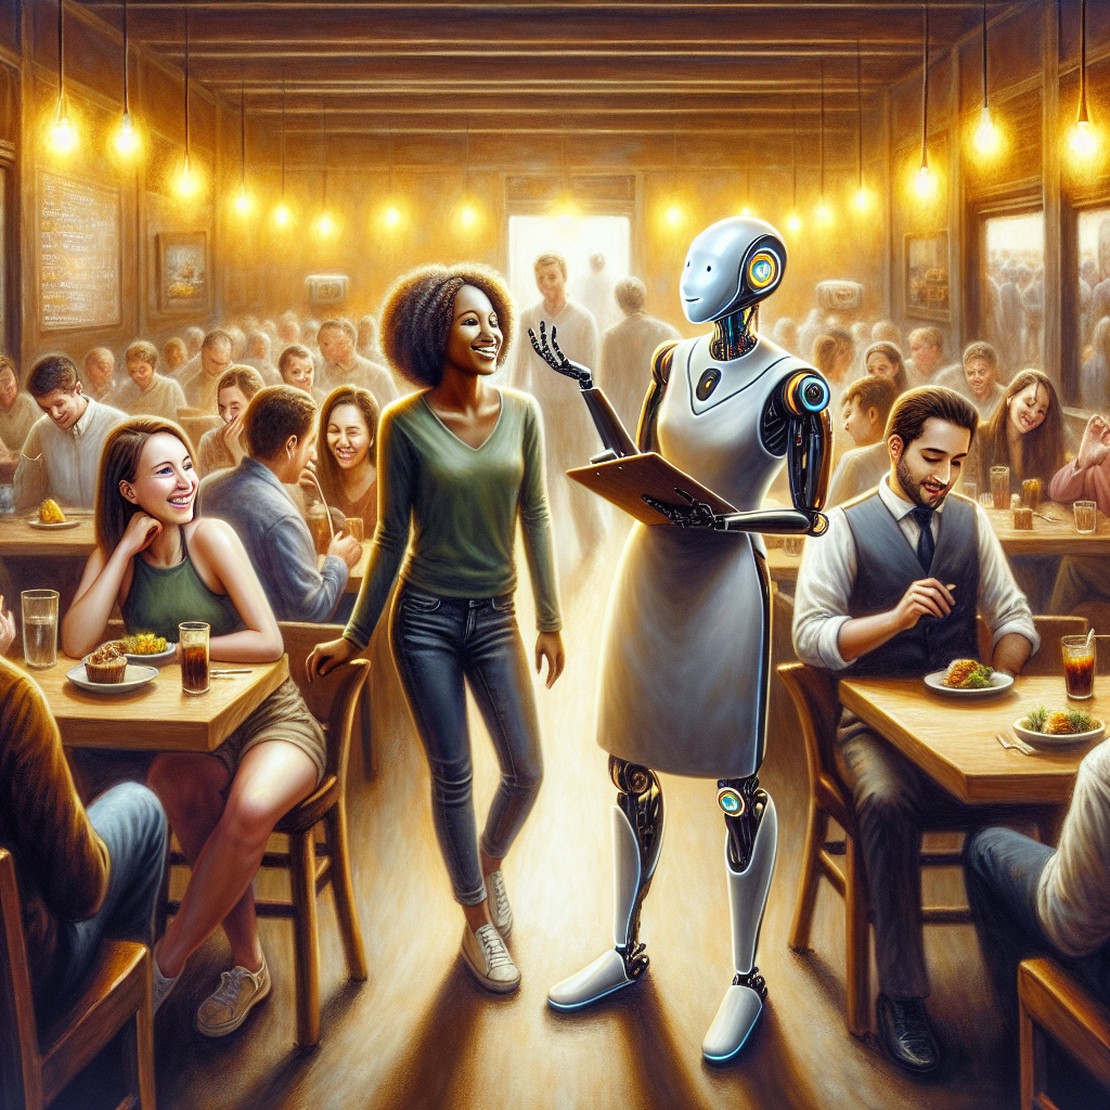 10 Ways AI Will Revolutionize the Restaurant Industry in the Next 5 Years